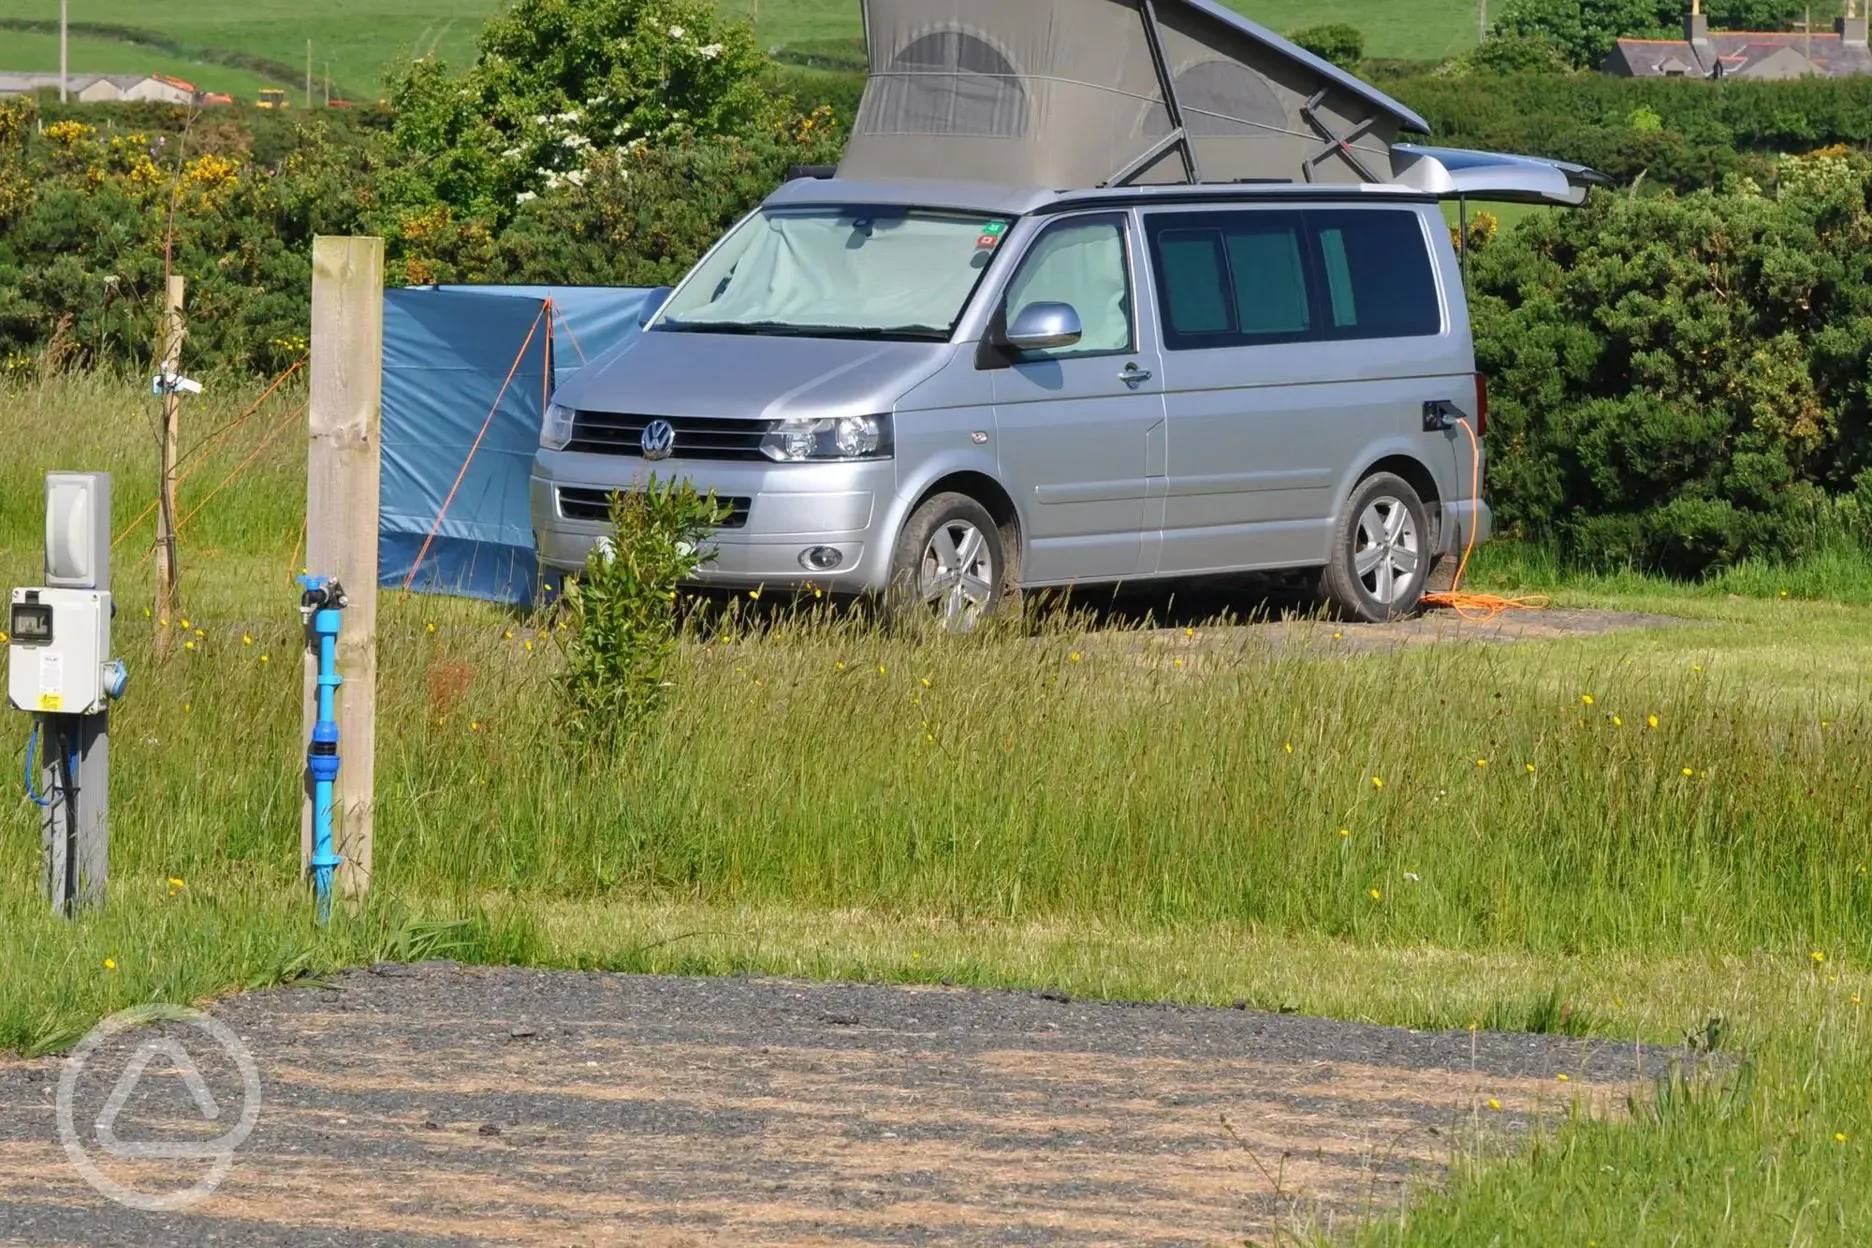 Electric hardstanding touring pitches